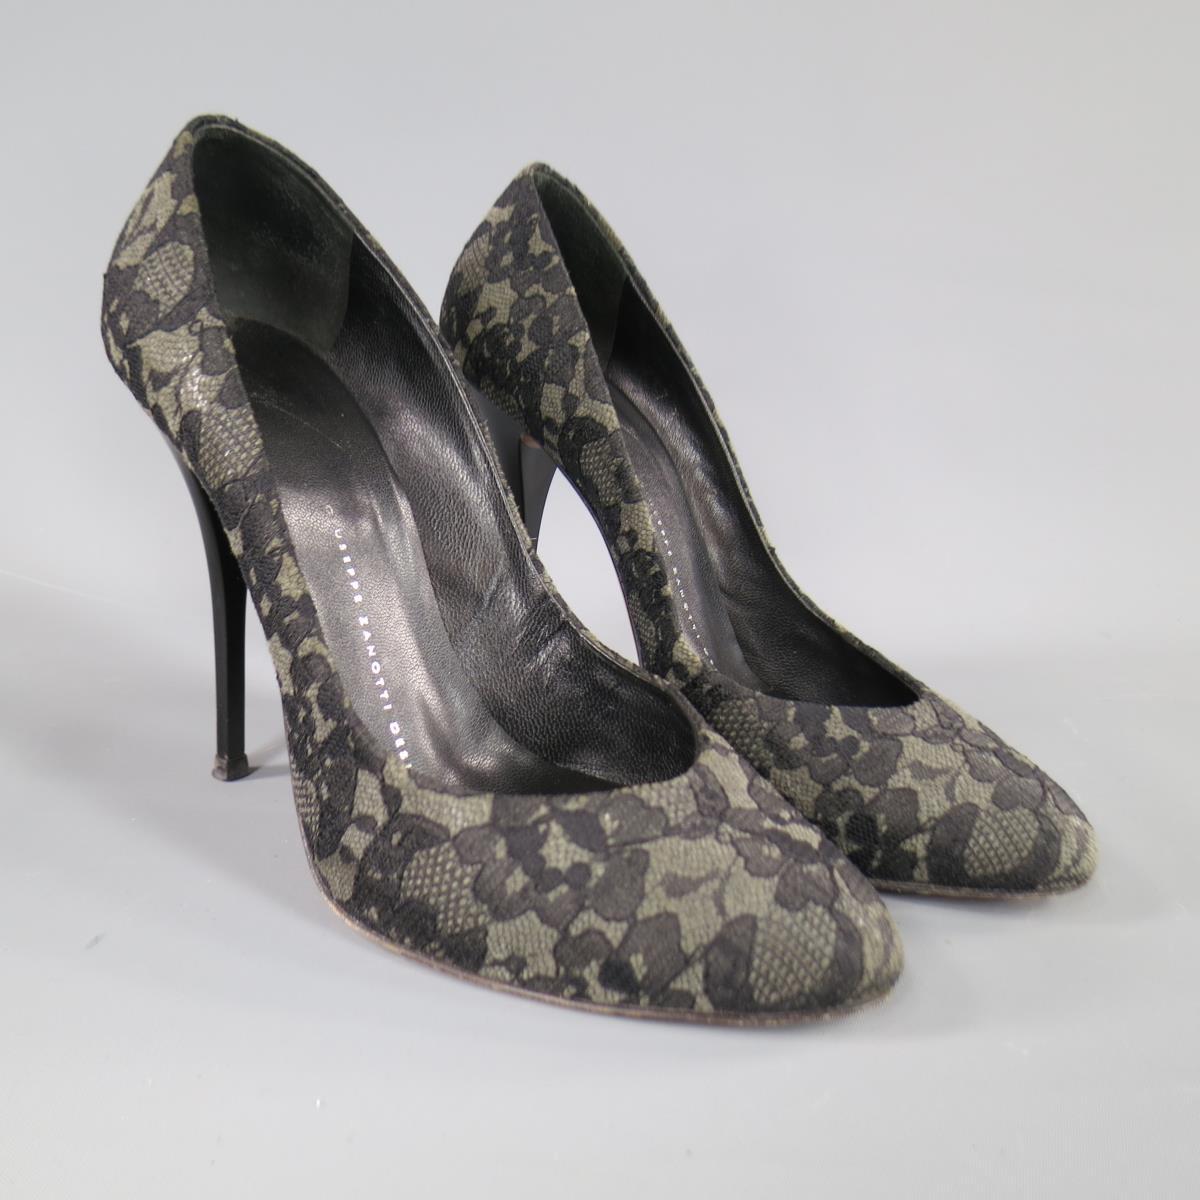 These sexy GIUSEPPE ZANOTTI pumps come in charcoal grey with black lace overlay with a high matte lacquered stiletto heel. Made in Italy. 
Very Good Pre-Owned Condition.
 

Marked:   37.5
 

Measurements: 
   
l	Heel: 3 inches 
l	Width: 
4.5 inches